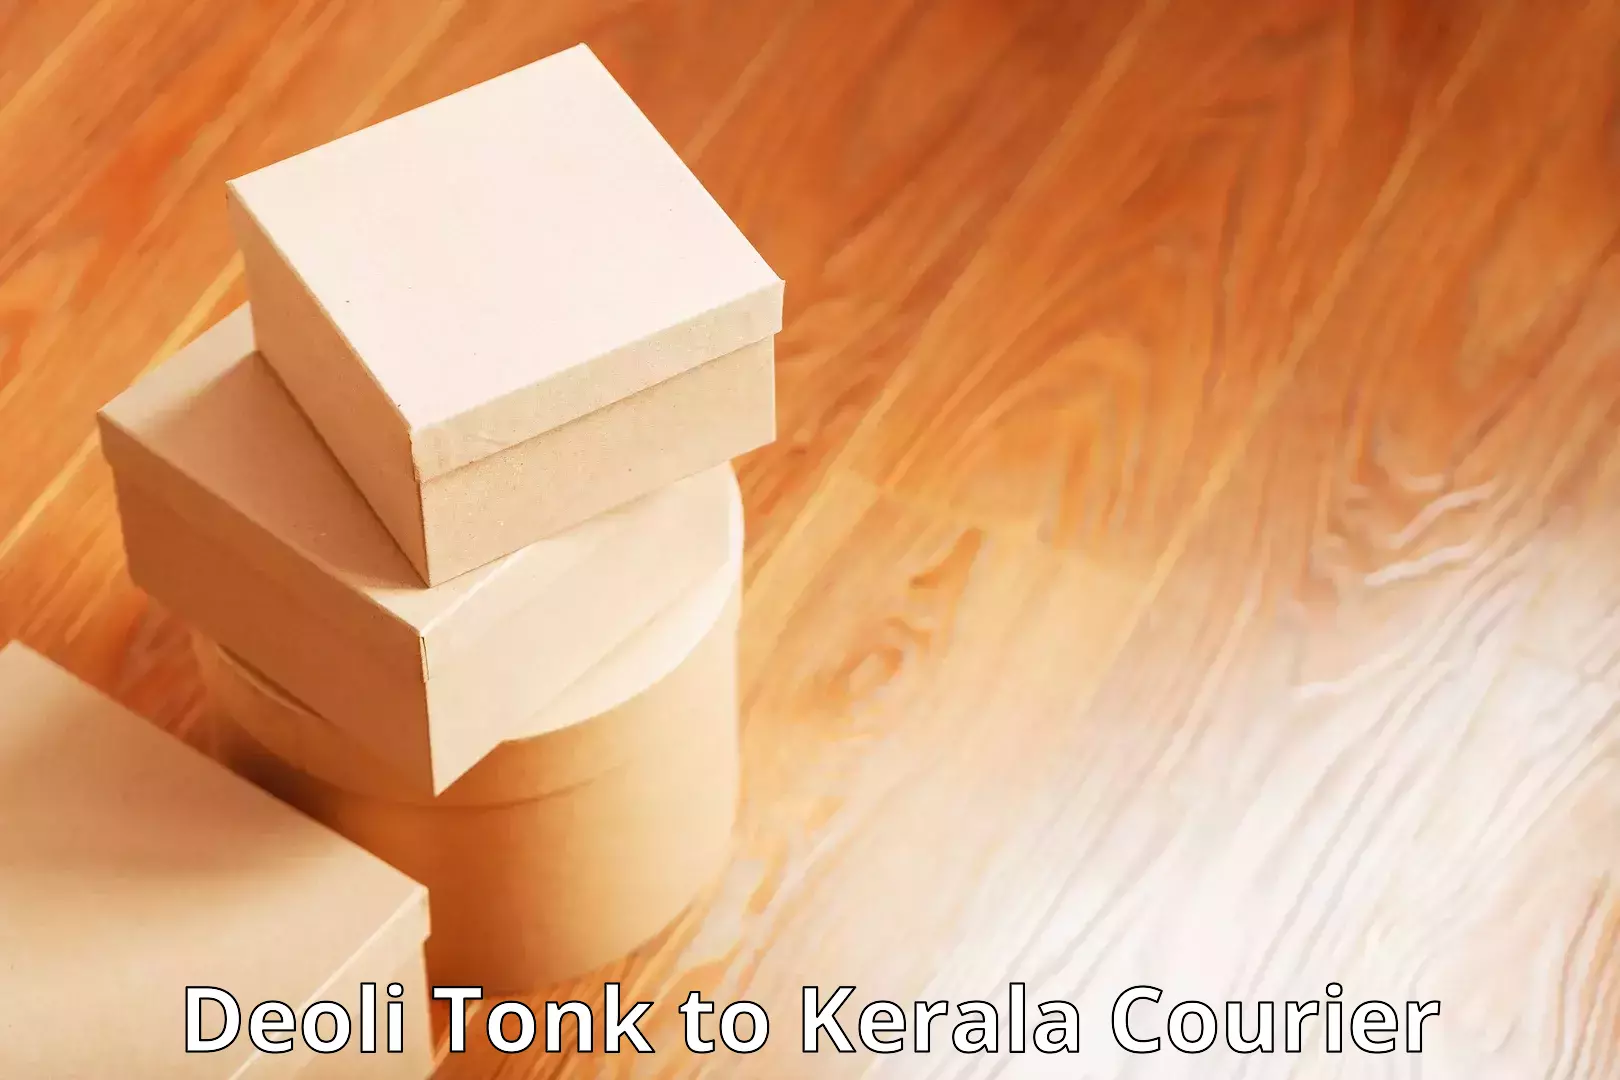 High-speed delivery Deoli Tonk to Kozhikode